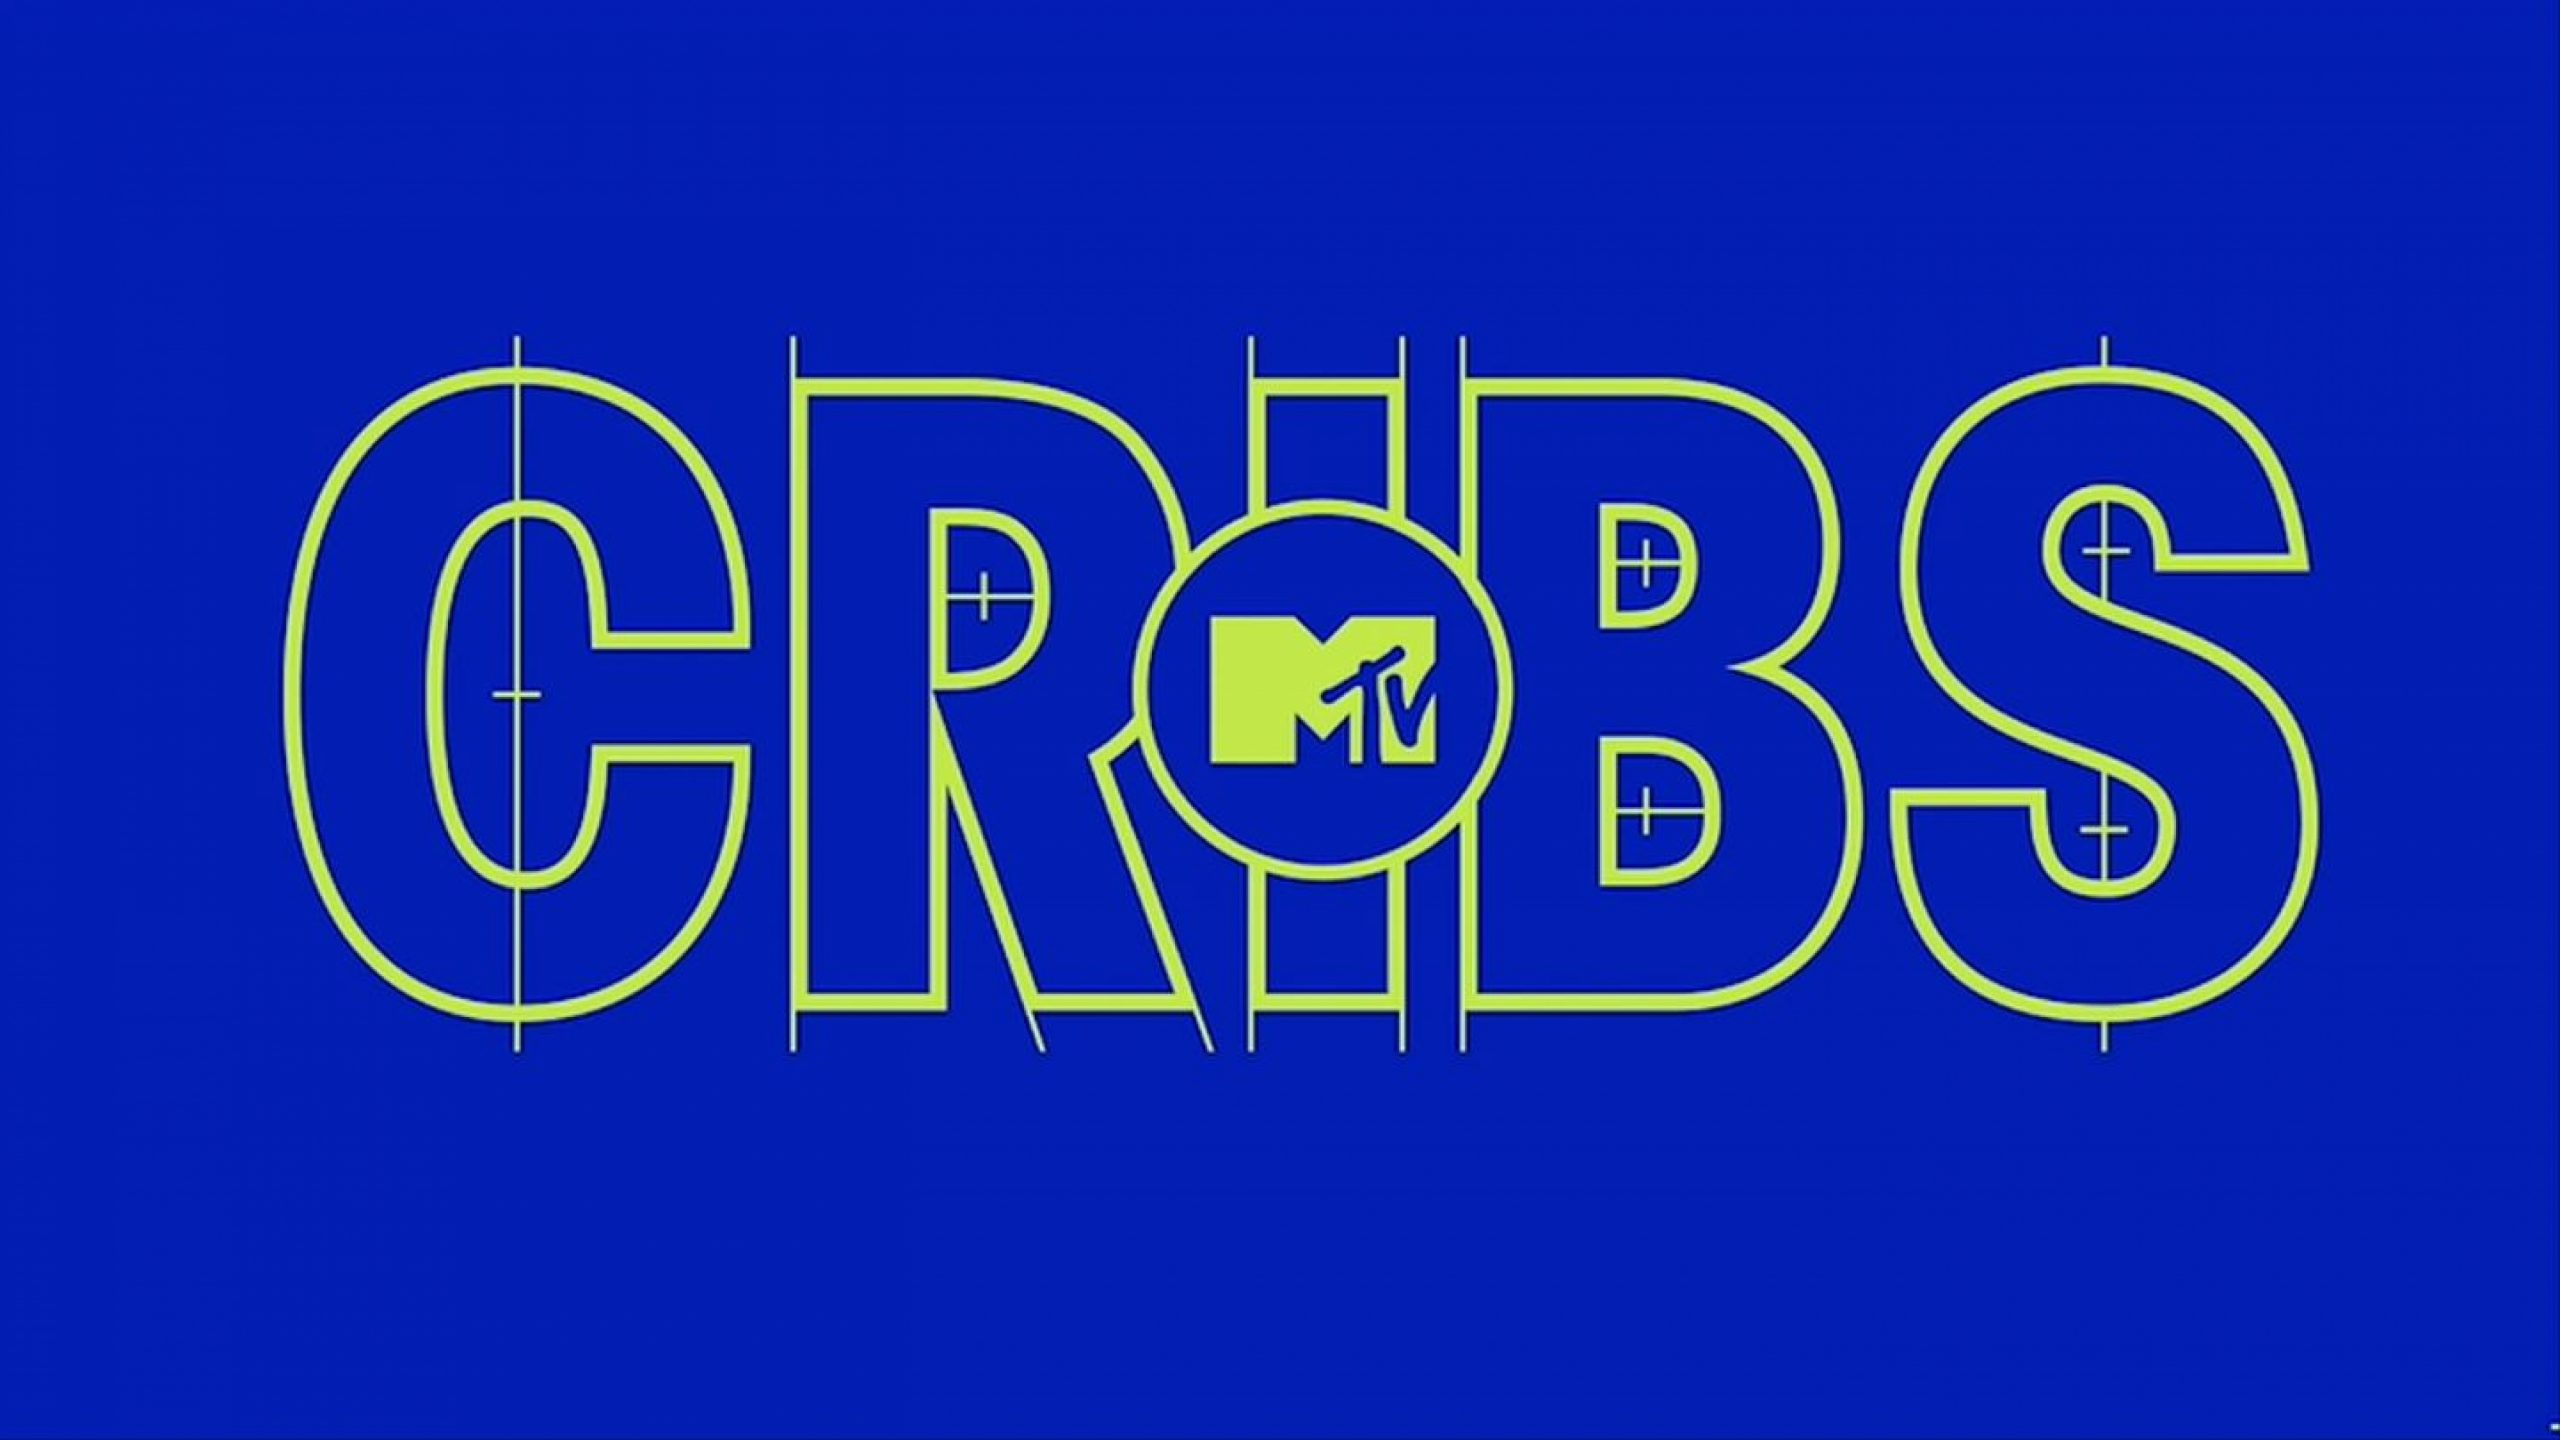 Cribs Is Coming Back To MTV